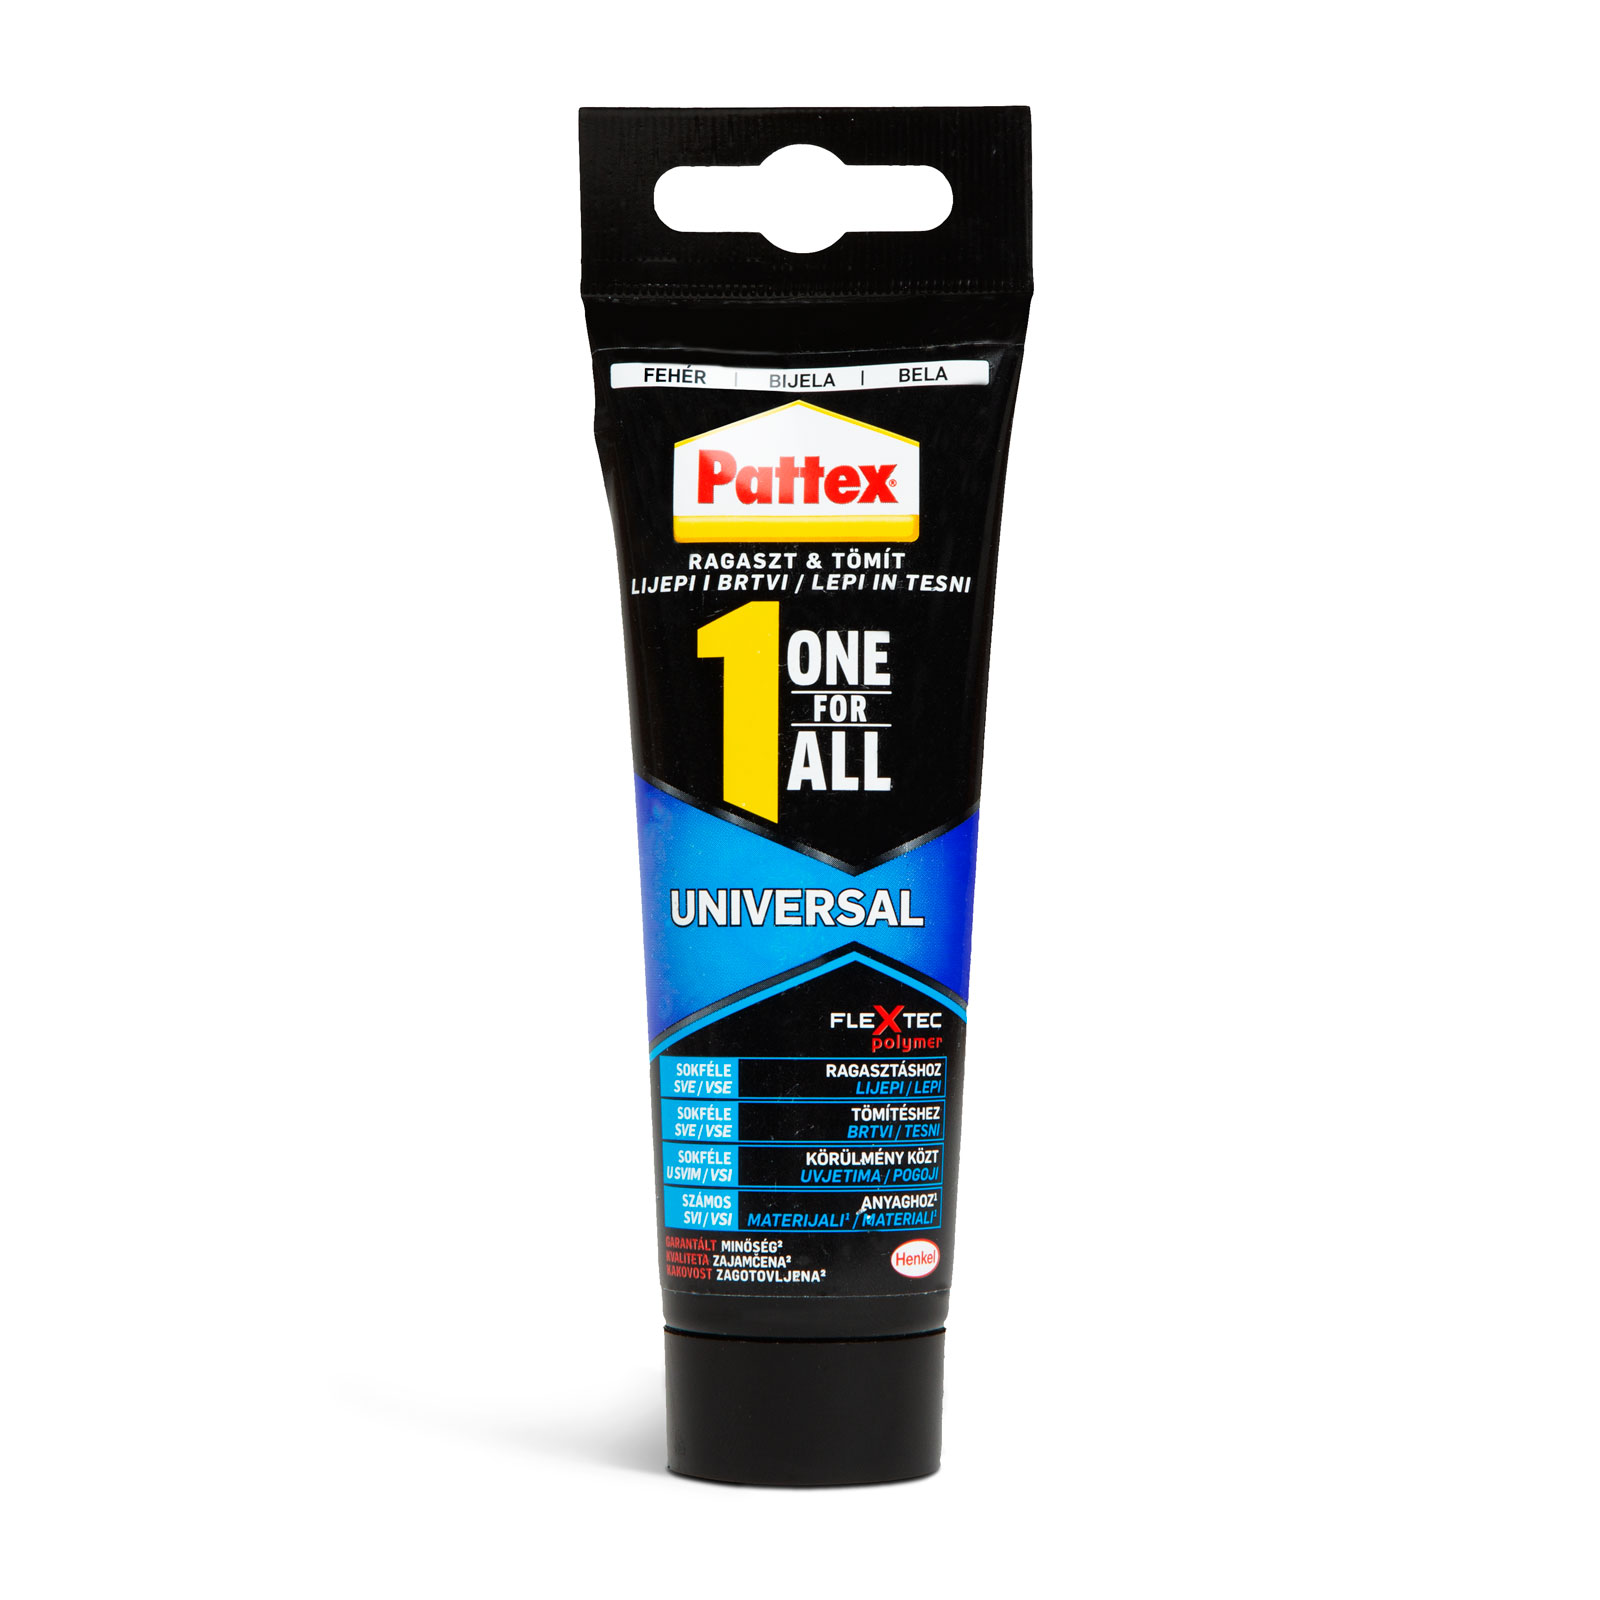 Pattex One For All Universal glue -tube- 142 g thumb